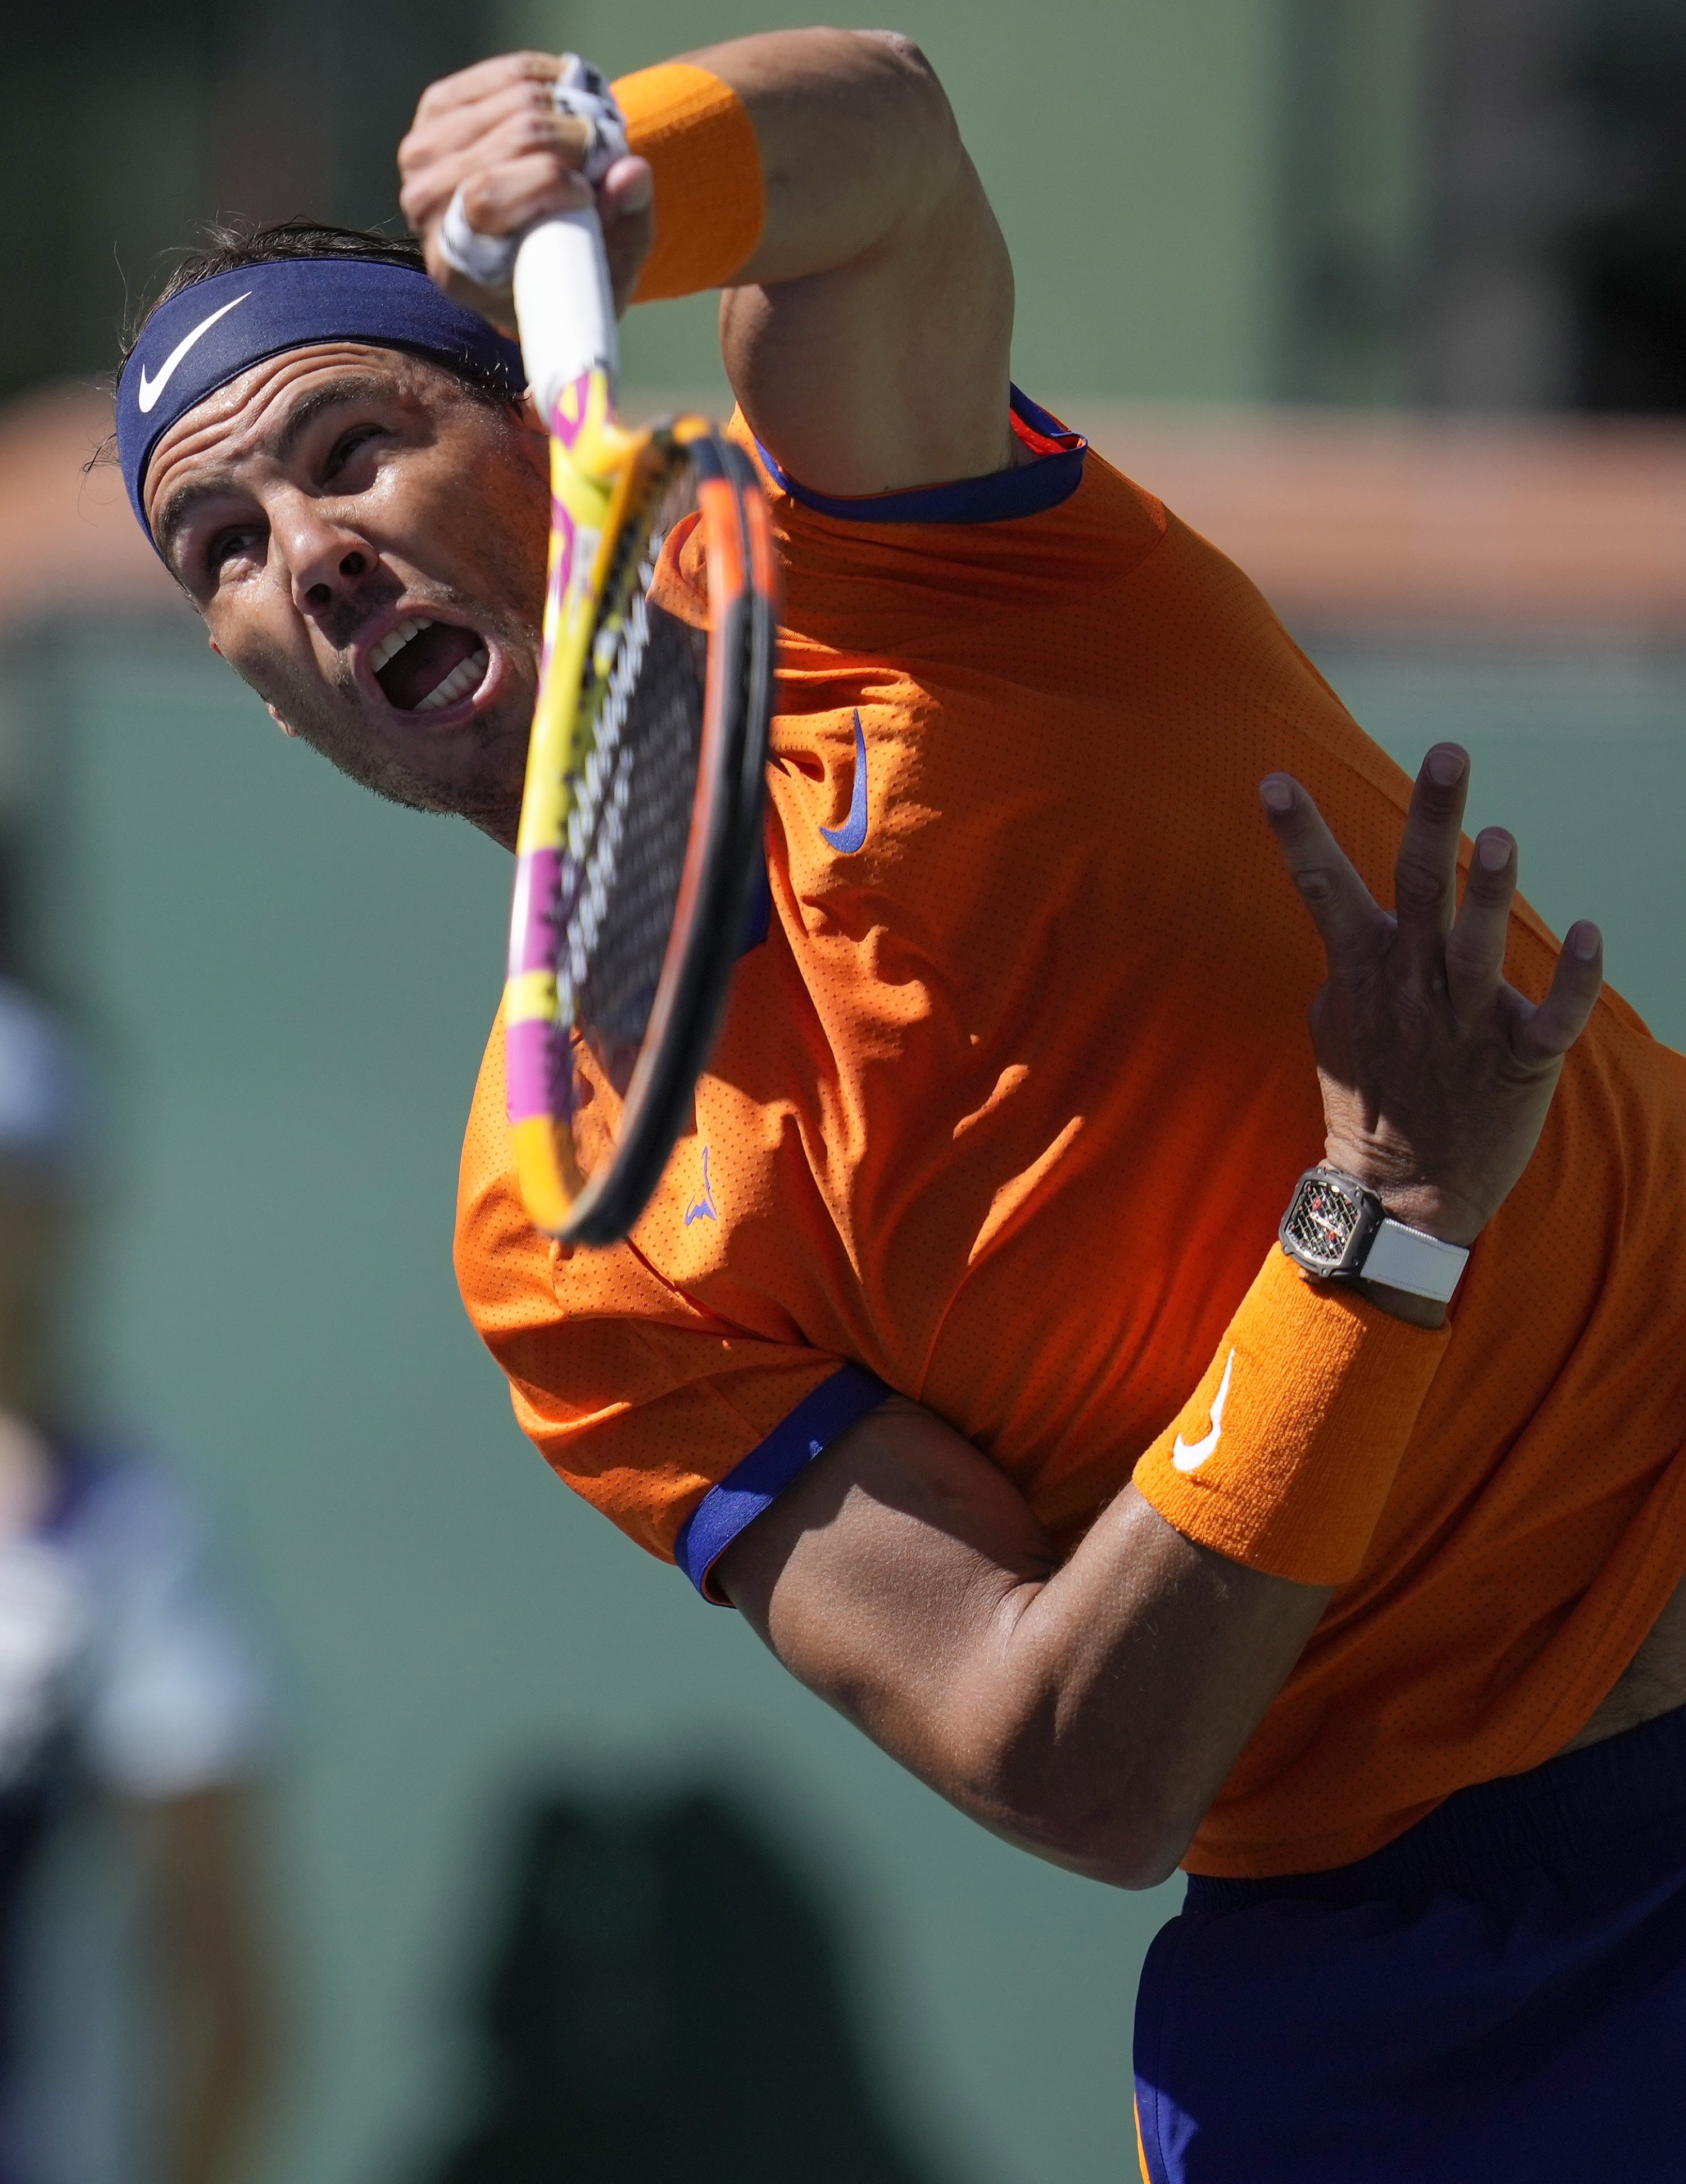 Medvedev, Tsitsipas out as Indian Wells Open sees major upsets Daily Sabah